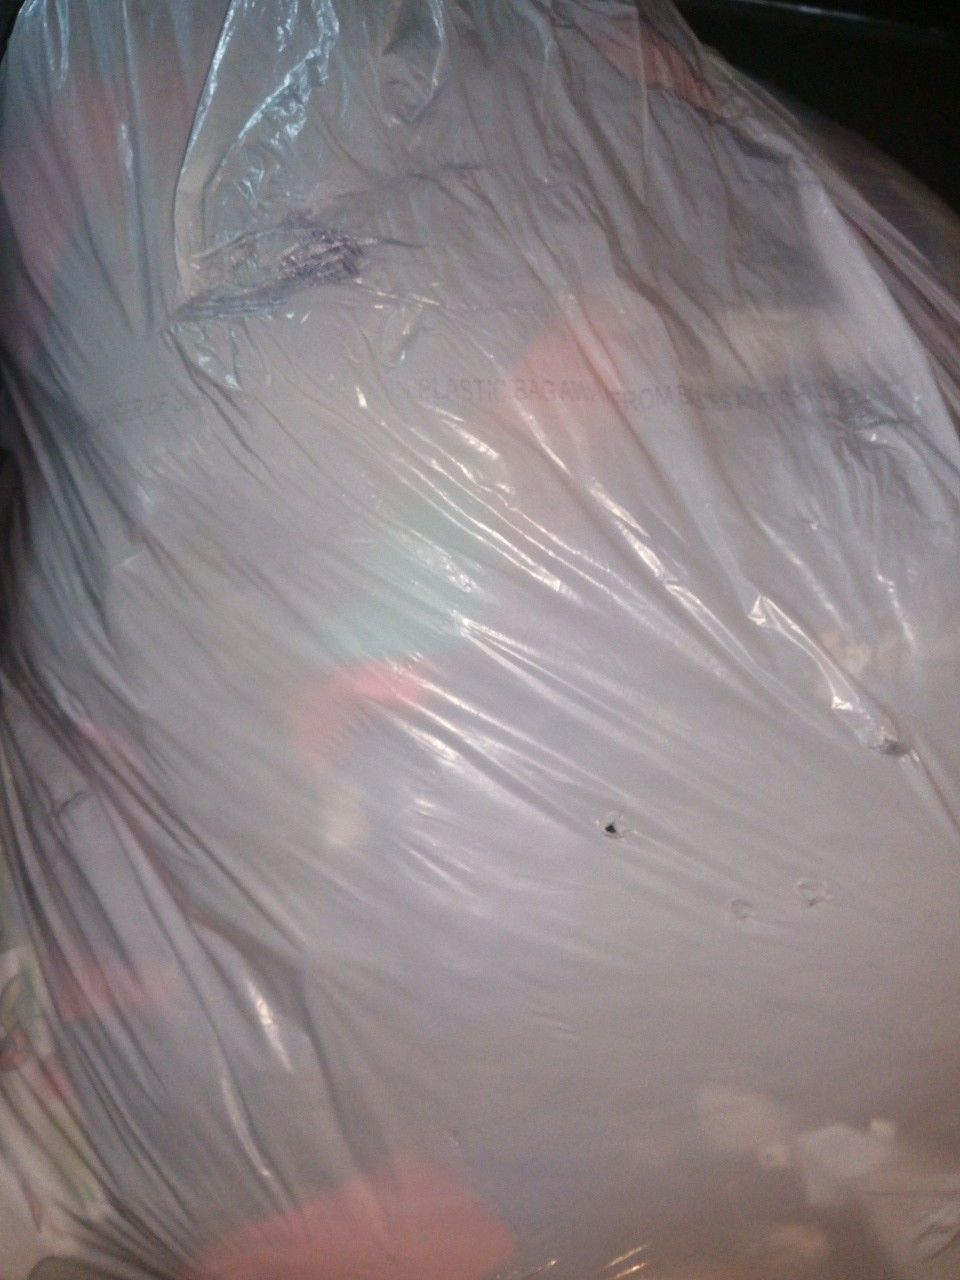 2 or 3 13 gallon bags full of kids clothes